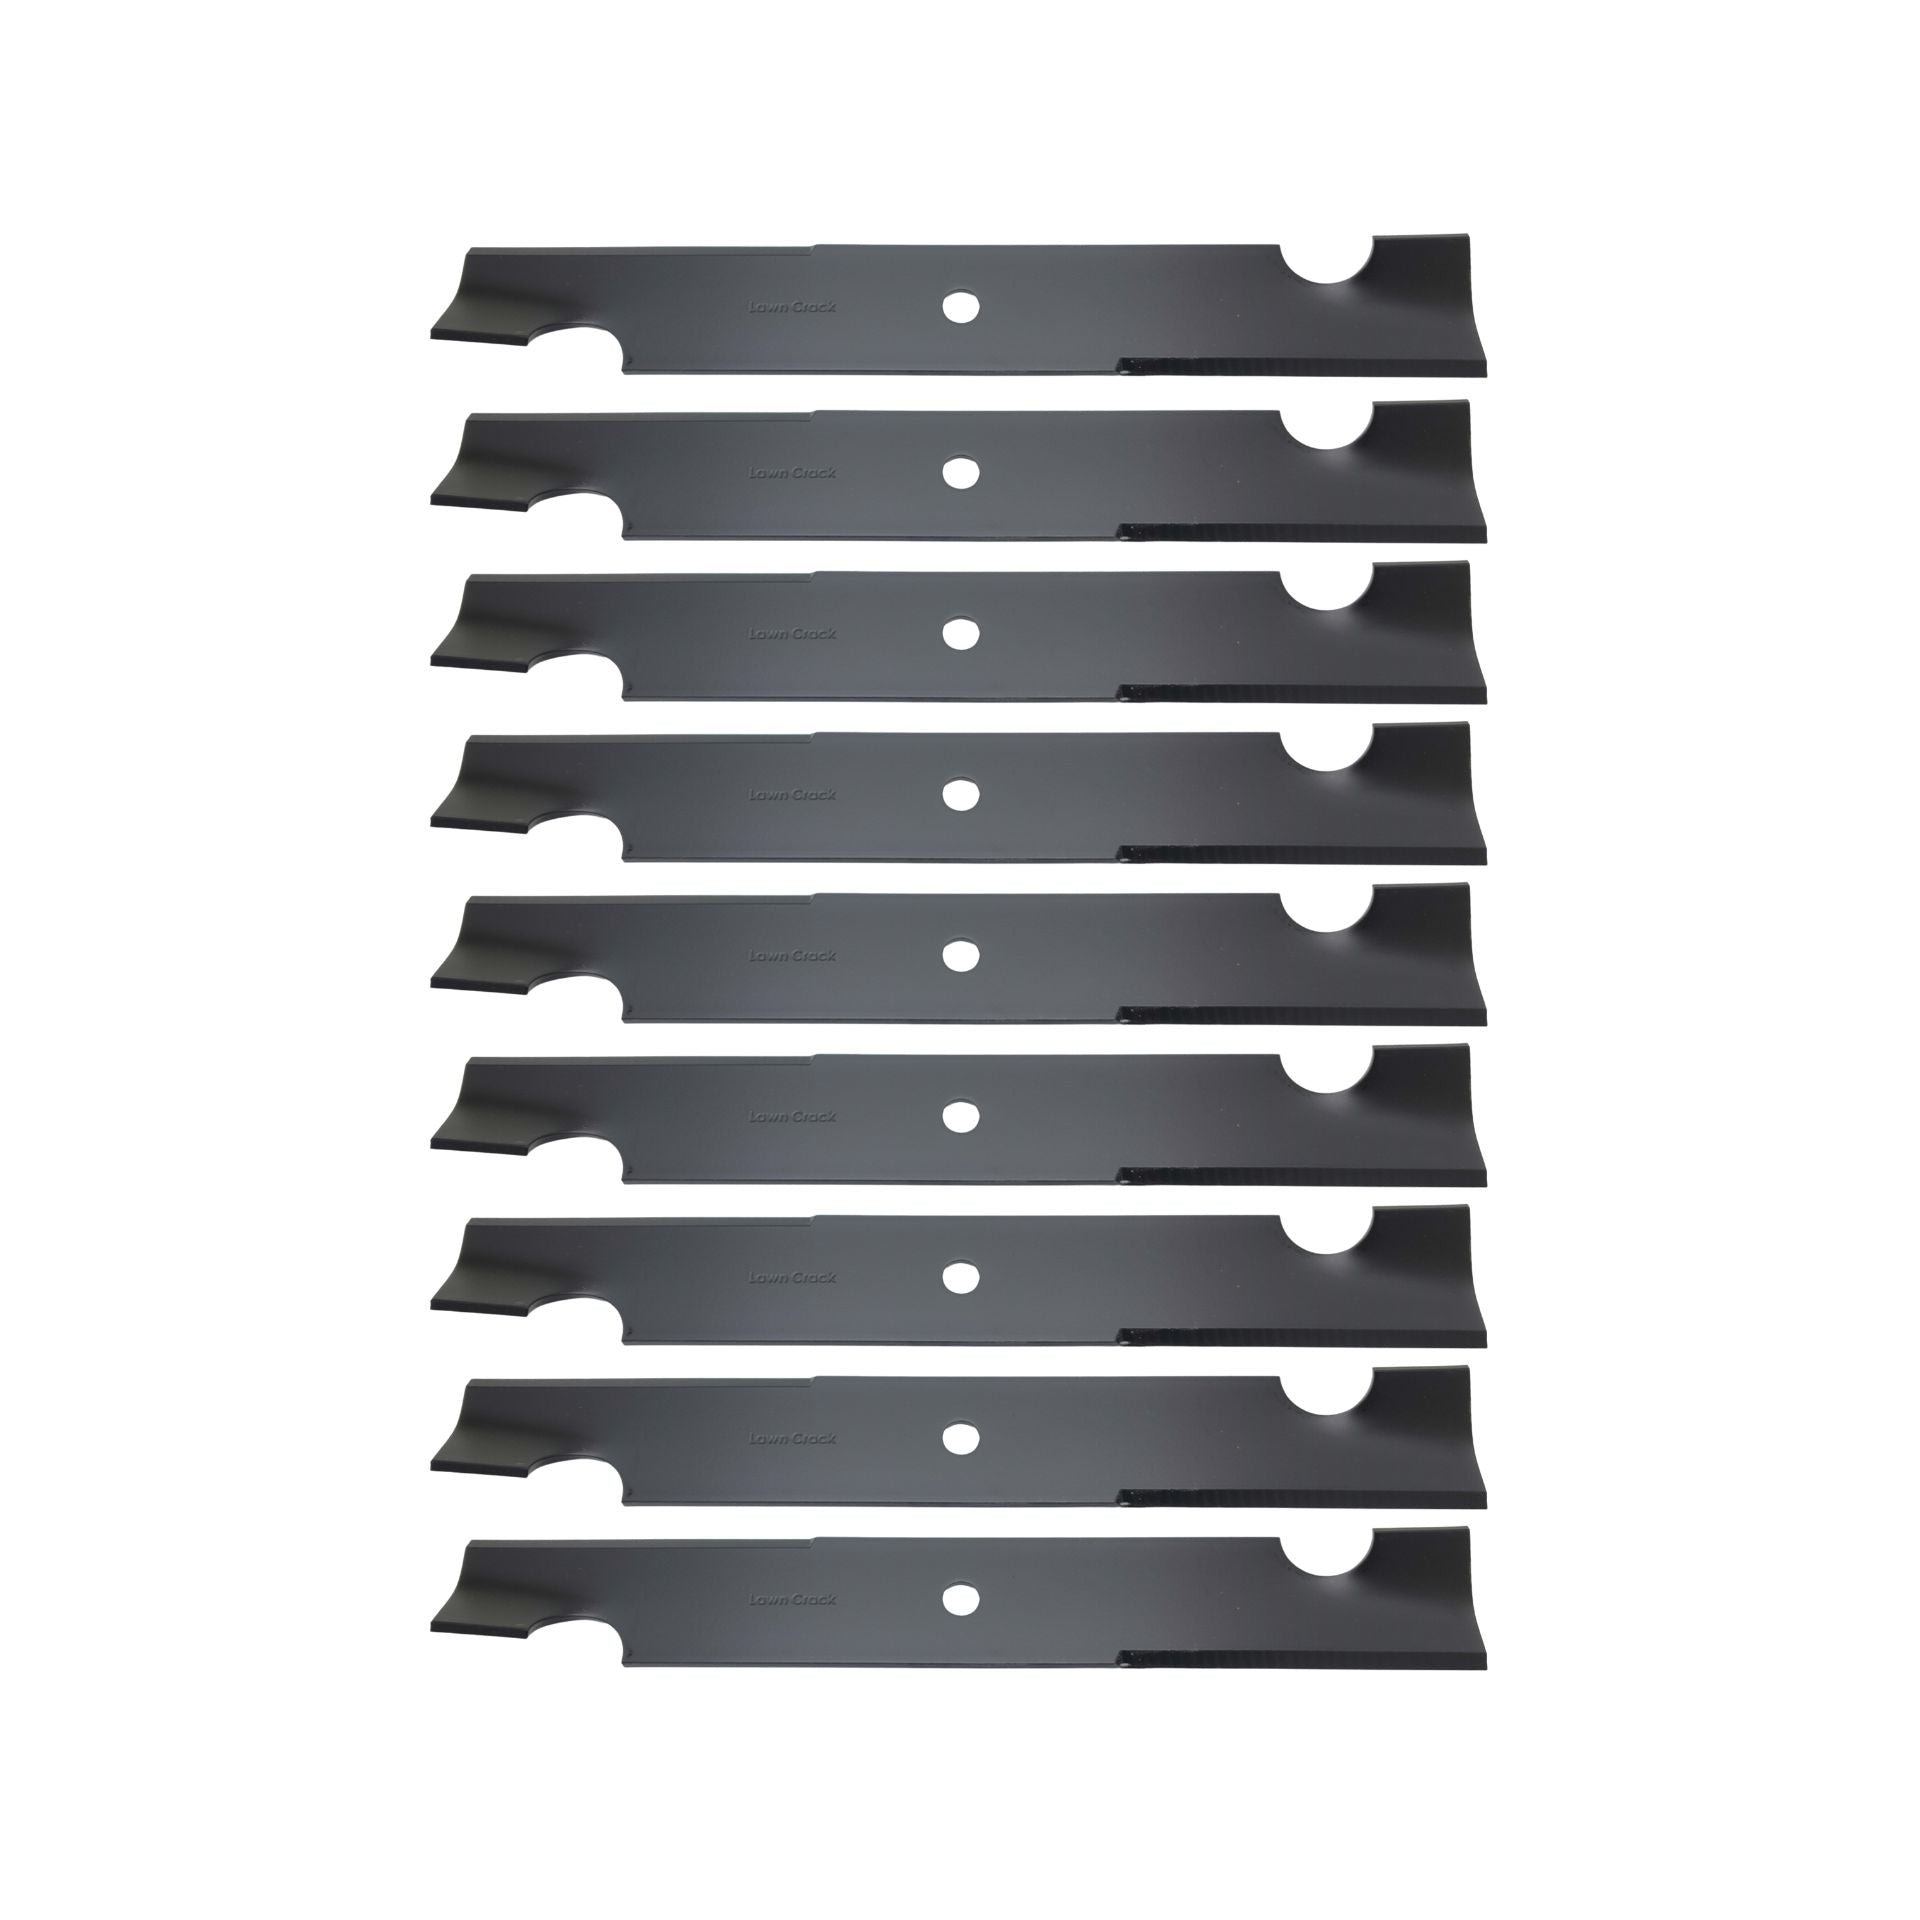 9-pack of Lawn Crack's 52-inch mower high lift lawn mower blades